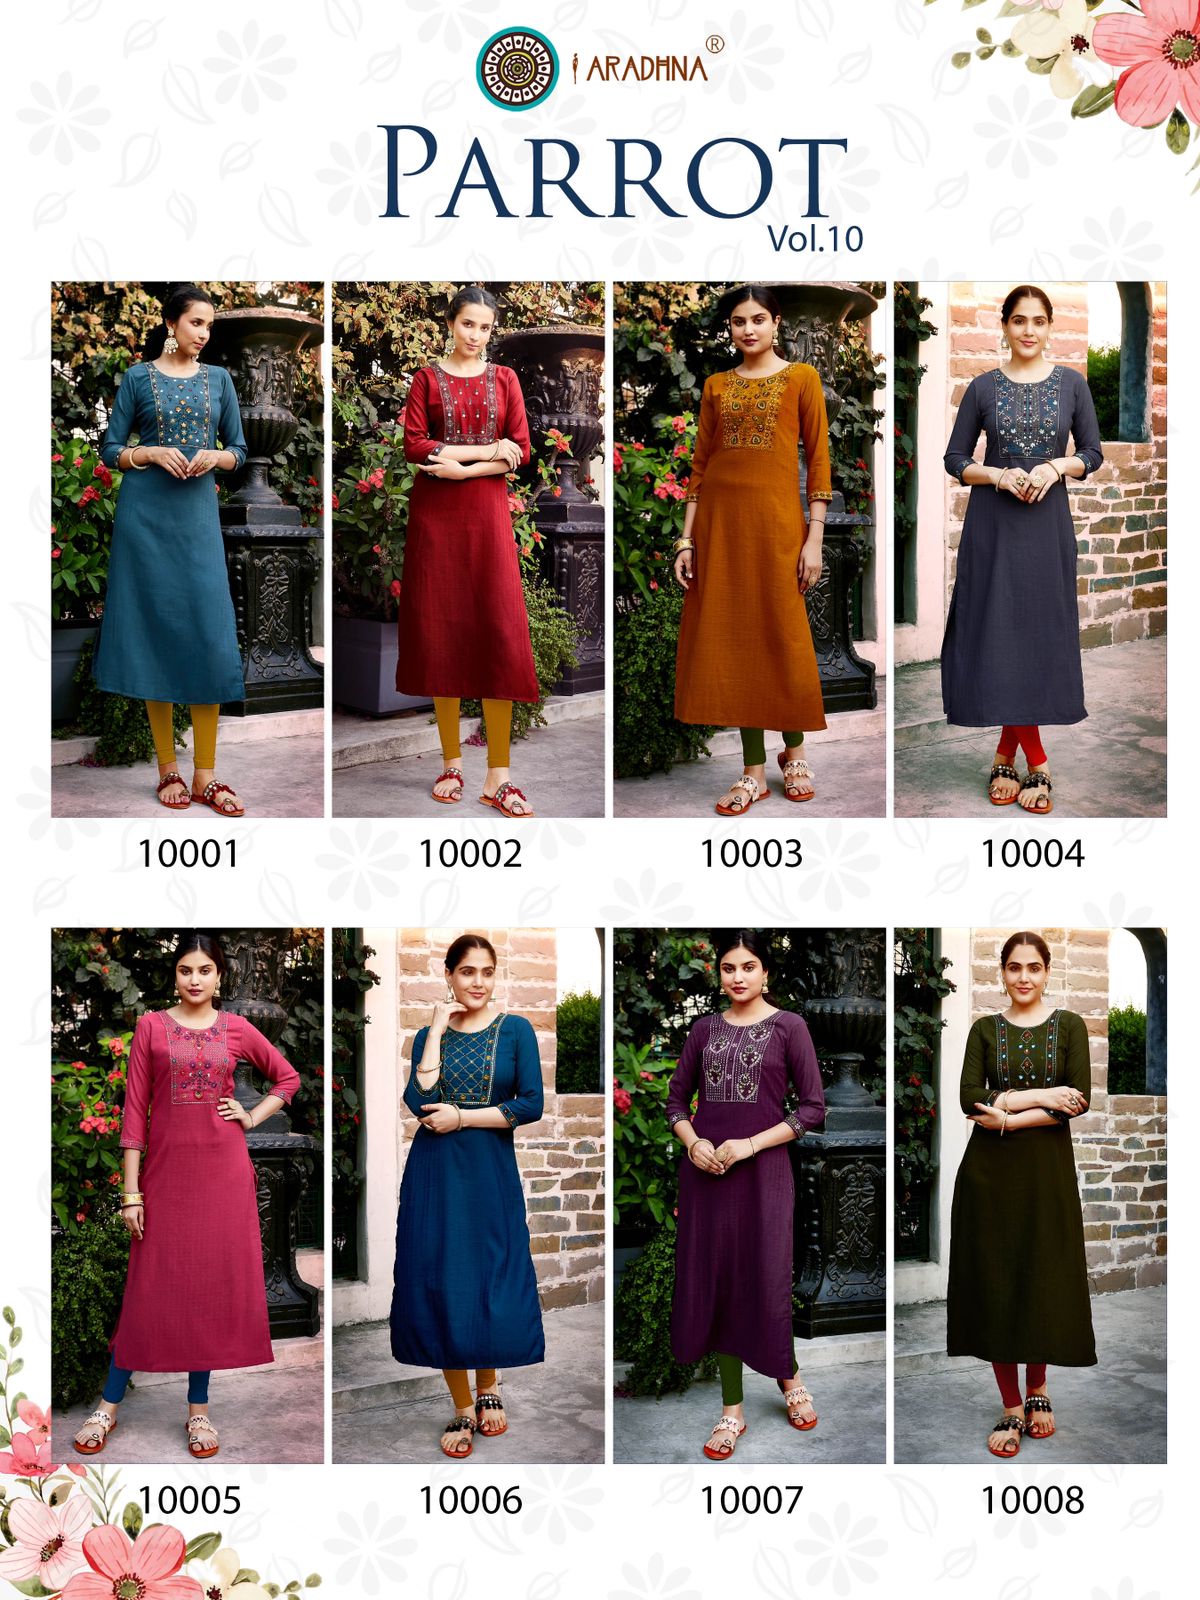 Aradhna Parrot 10 collection 1